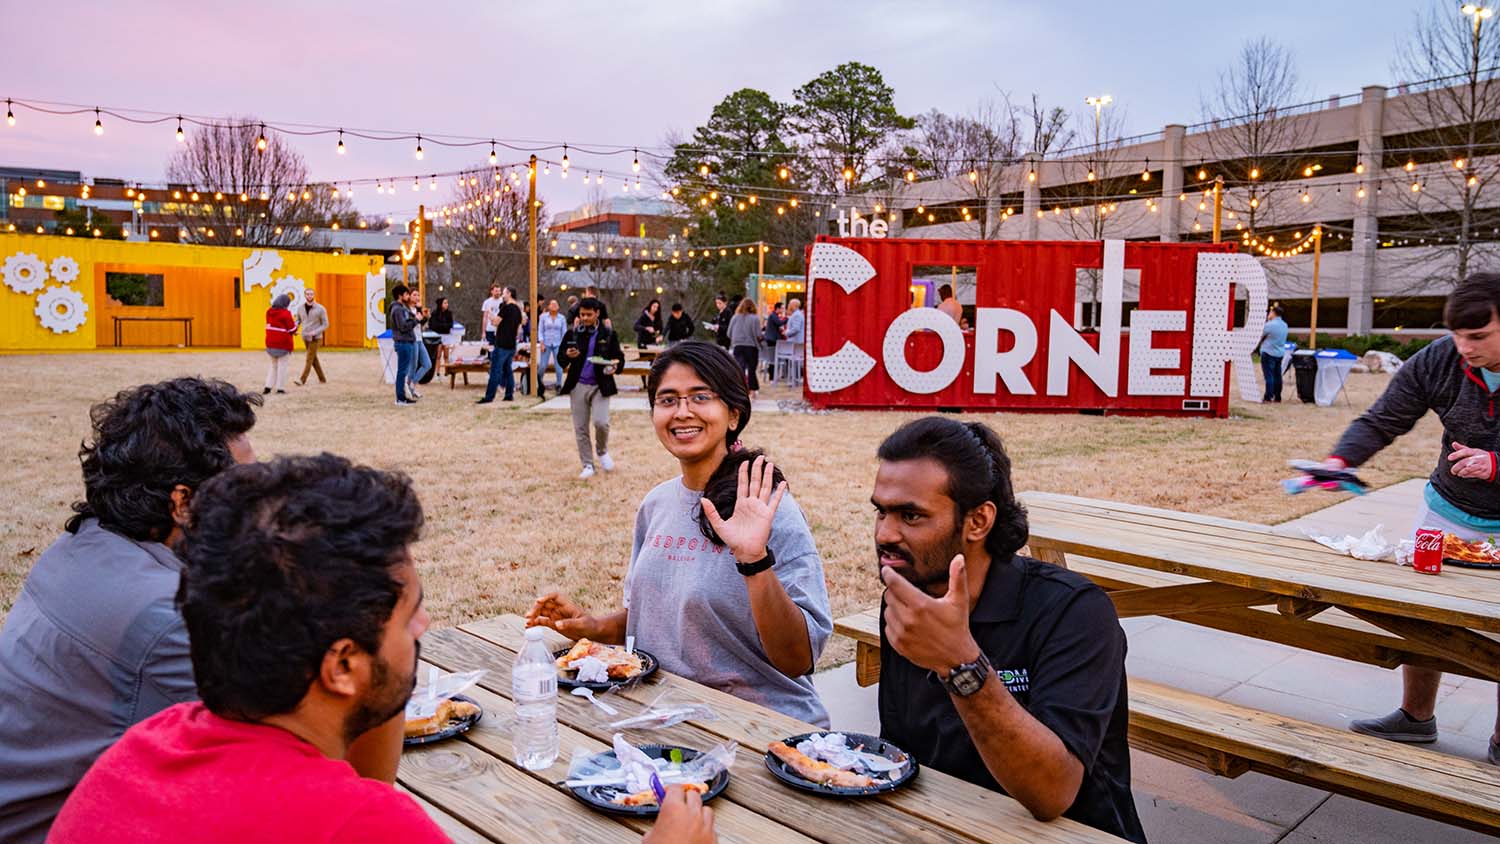 Students eat at picnic tables during a food truck rodeo at The Corner.